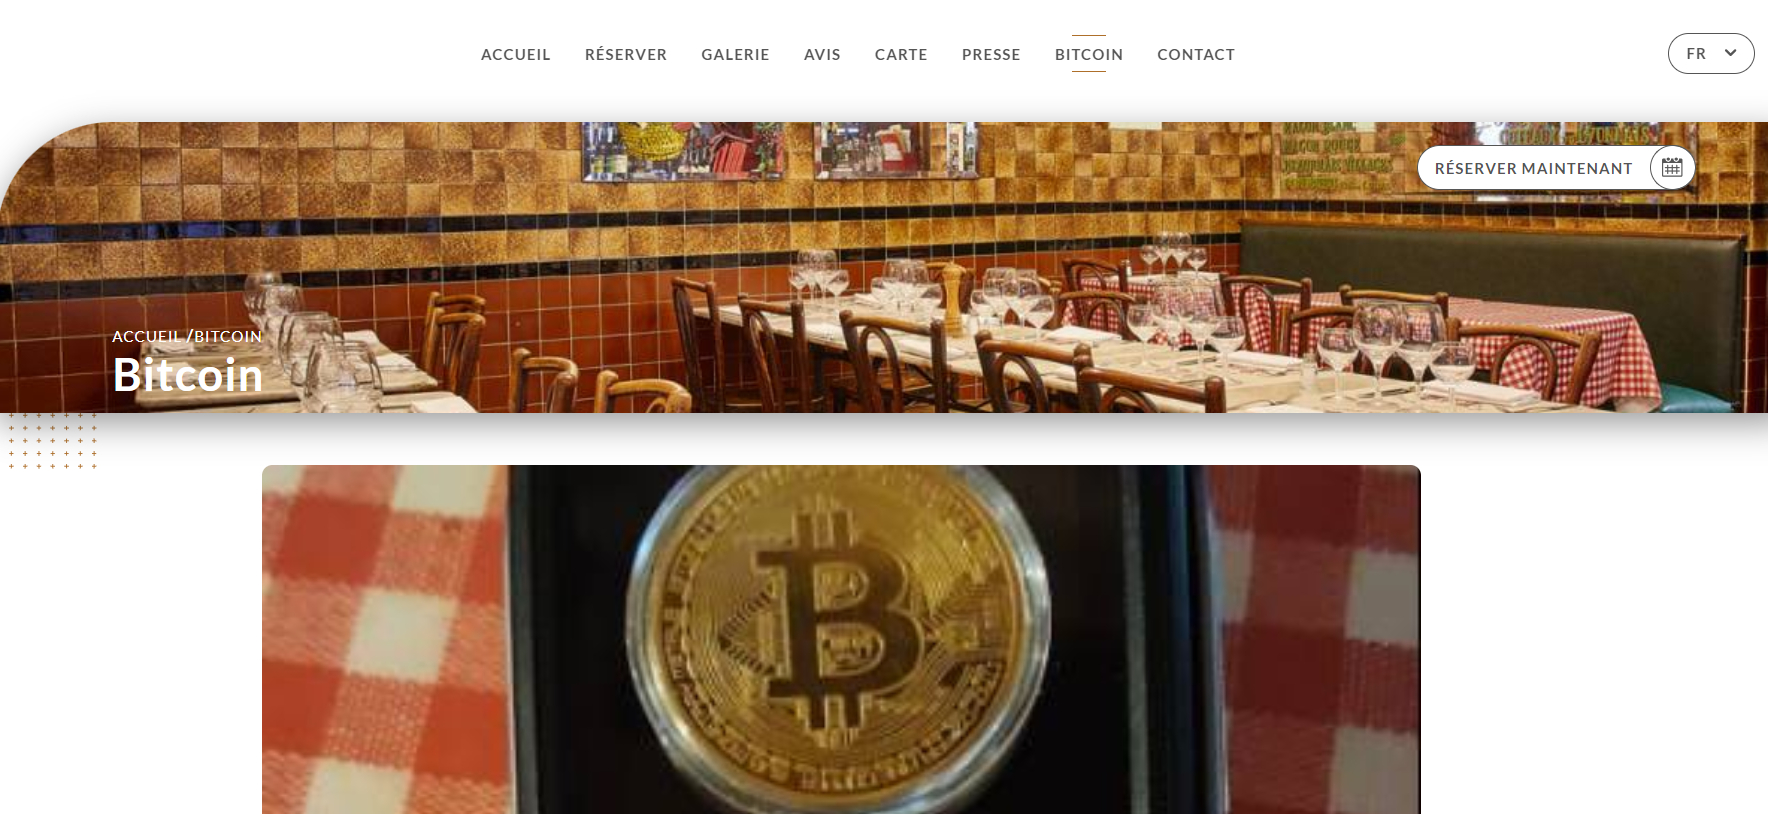 A page dedictaed to Bitcoin on a resturant's website.